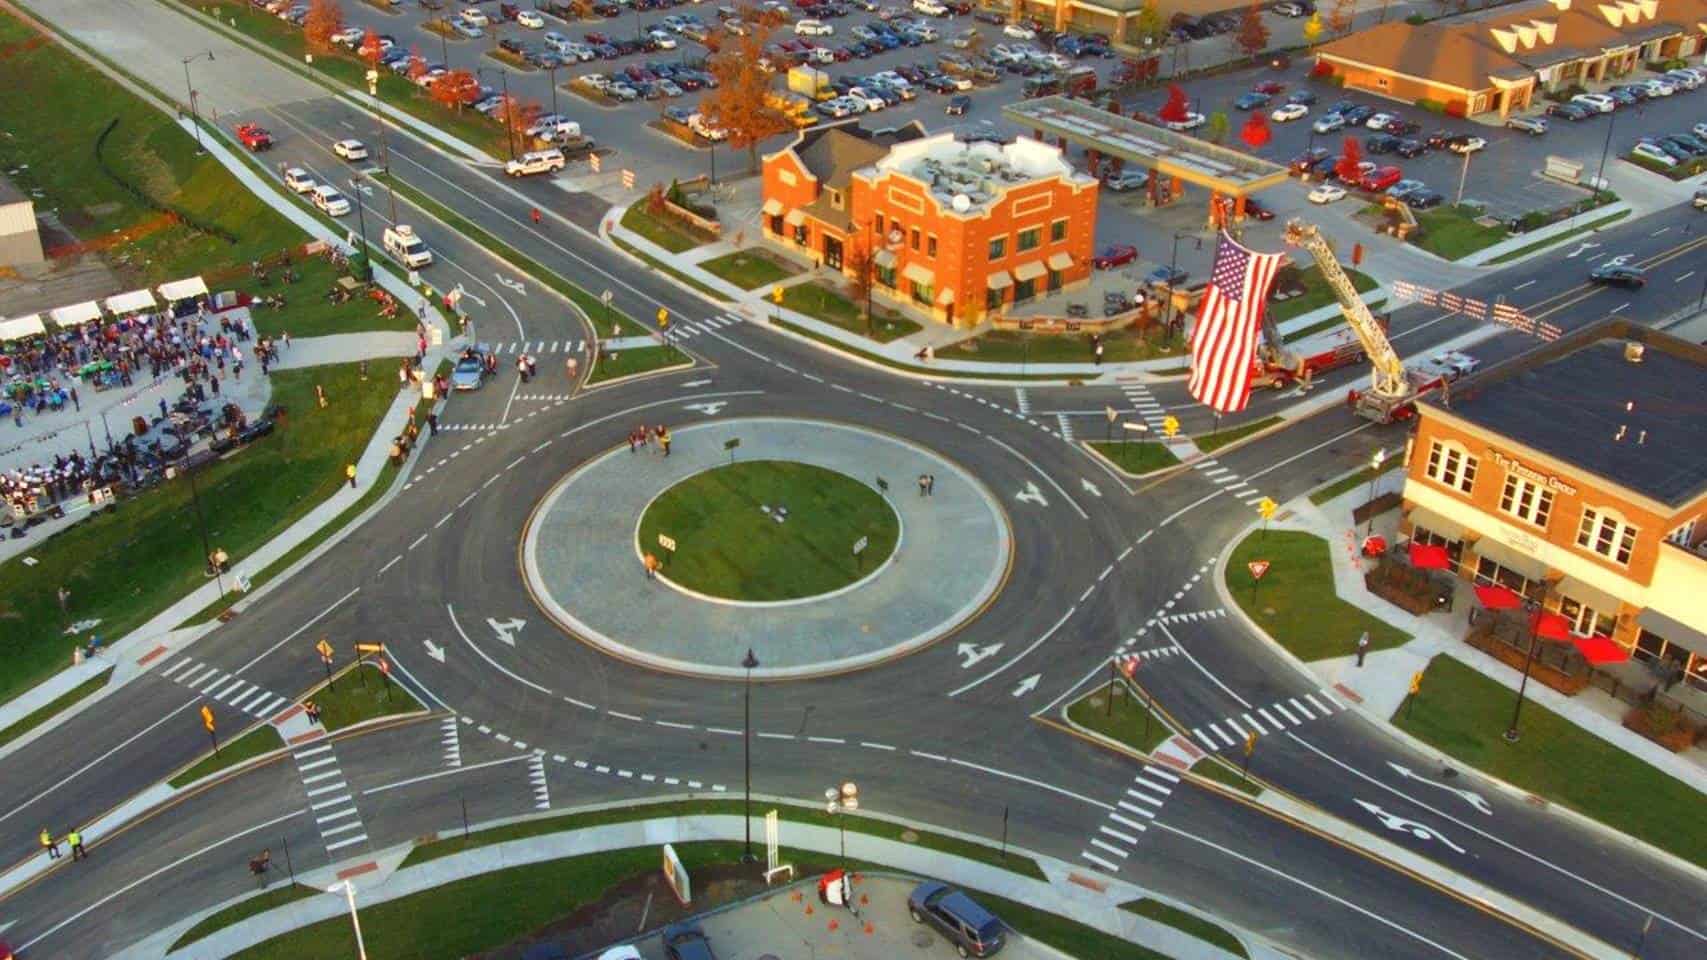 Carmel Indiana Champions Traffic Roundabouts As Way To Lessen Congestion